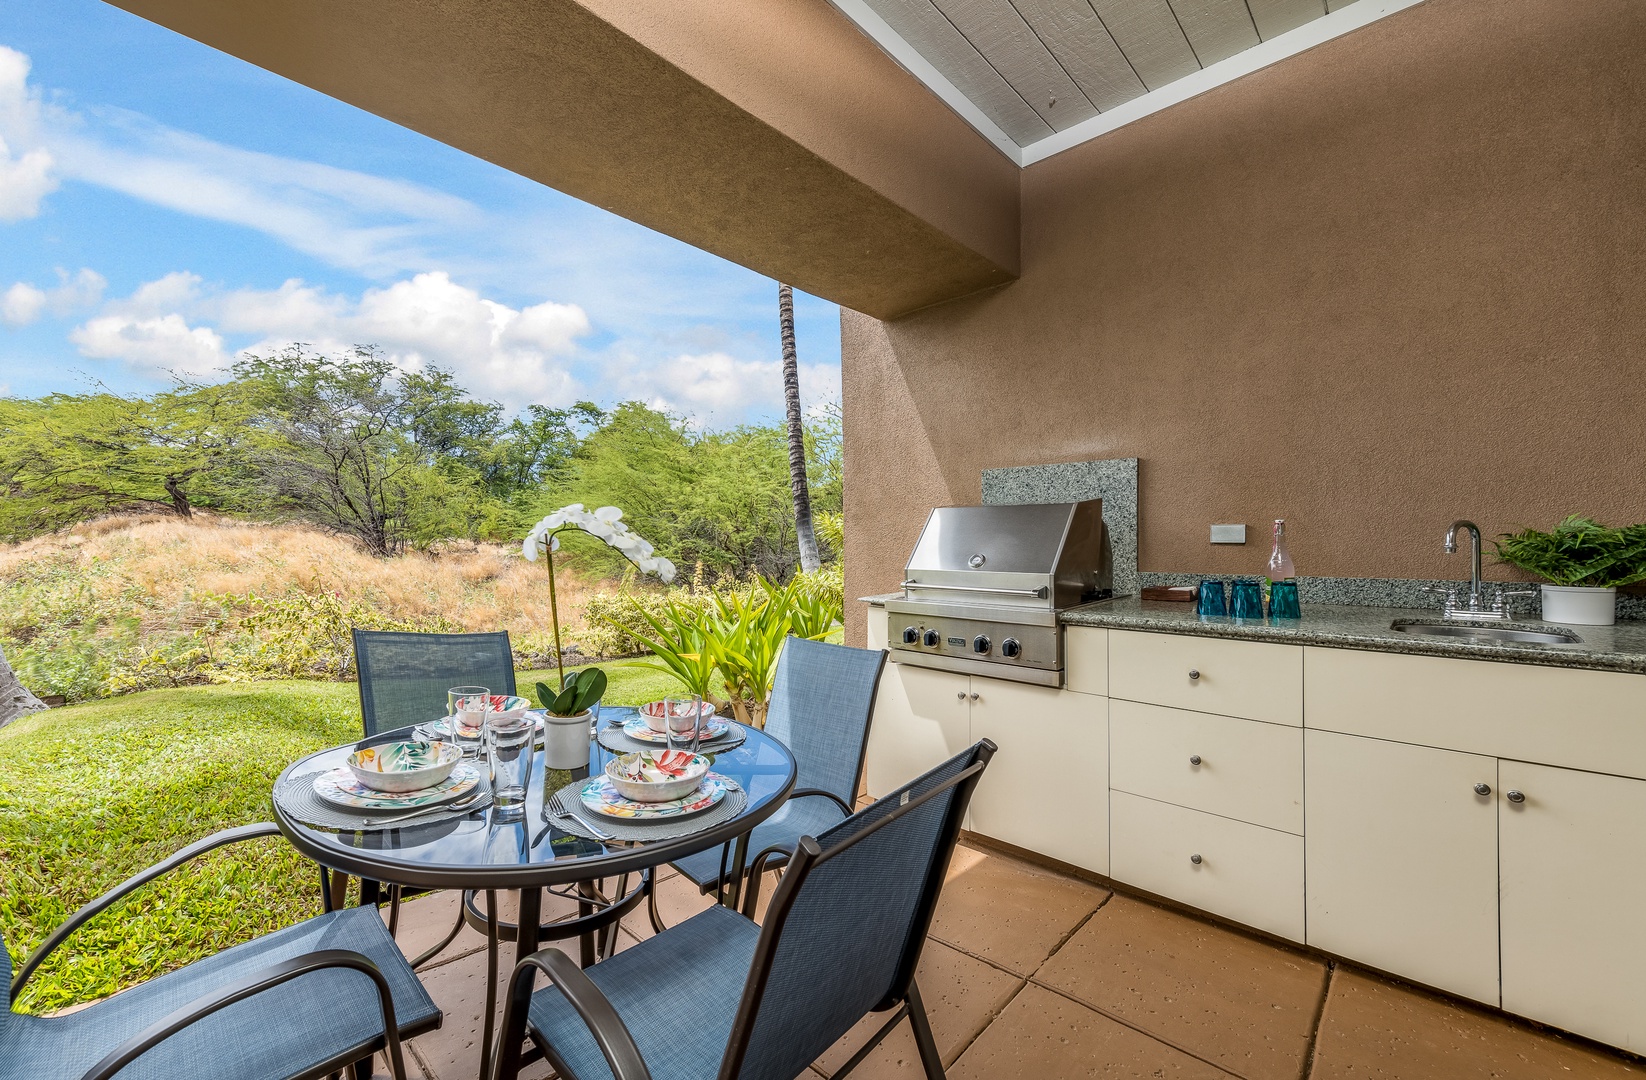 Kamuela Vacation Rentals, Mauna Lani Fairways #603 - Al fresco dining on the patio, surrounded by native landscape views.